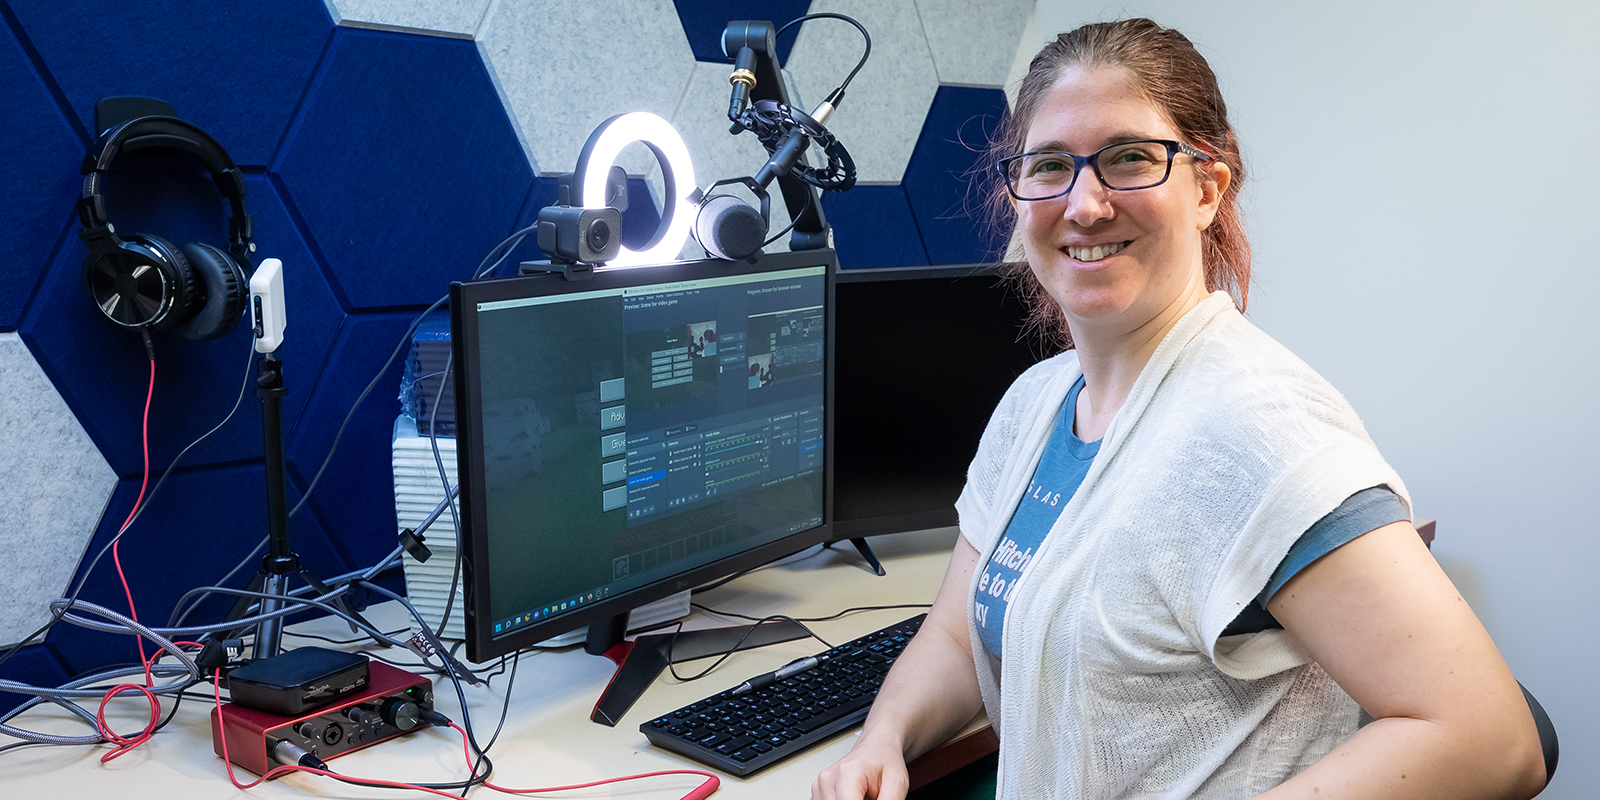 Samantha Close, an assistant professor in the College of Communication, has transformed a small office in DePaul’s Daley Building into the Streaming Lab. The lab is equipped with monitors, microphones and professional lighting, as well as gaming consoles from the original Nintendo to the newest Play Station and the popular games to go with them. 